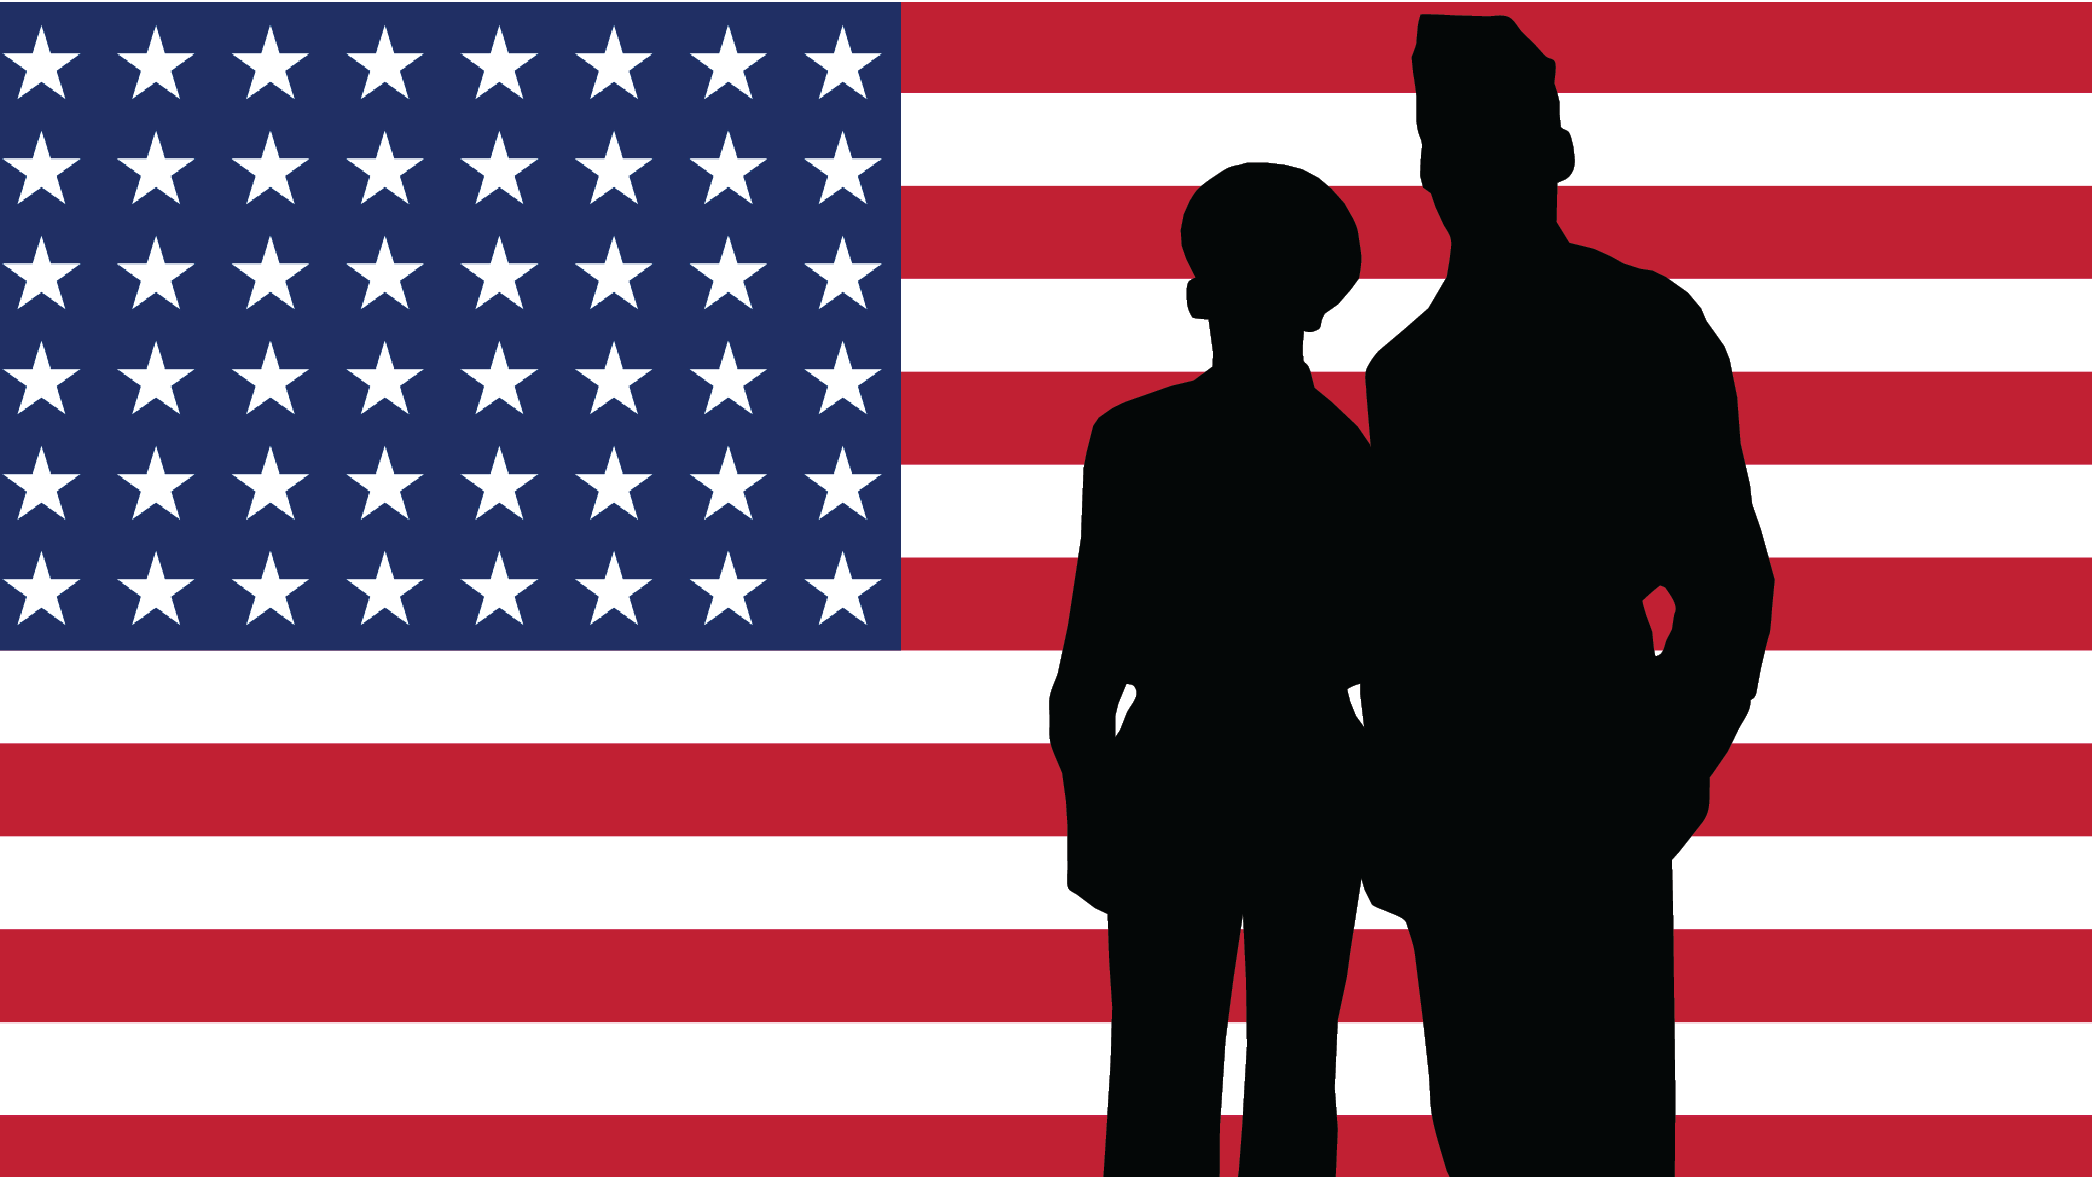 Two silhouettes of uniformed people in front of a 48 star flag